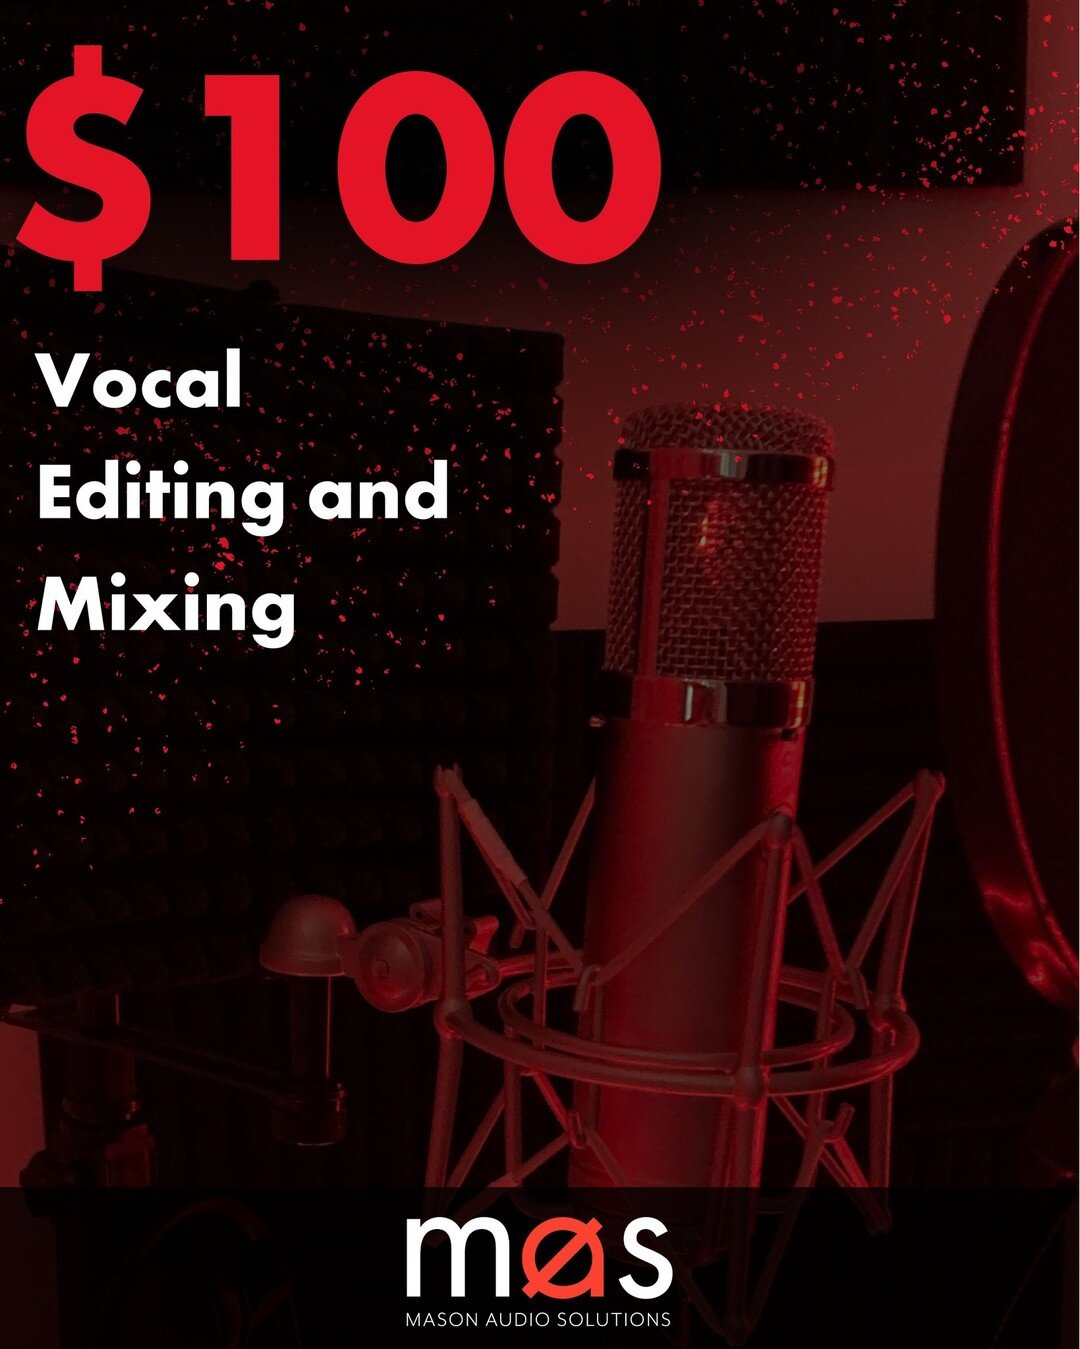 MAS is offering $100 Vocal/Voice Over Editing and Mixing for your ensemble all 2023 long! 🎙

Need your show vocals or voice overs to cut through the mix? MAS has you covered.

https://masonaudiosol.com/contact
.
.
.
#MAS #masonaudiosolutions #audioe